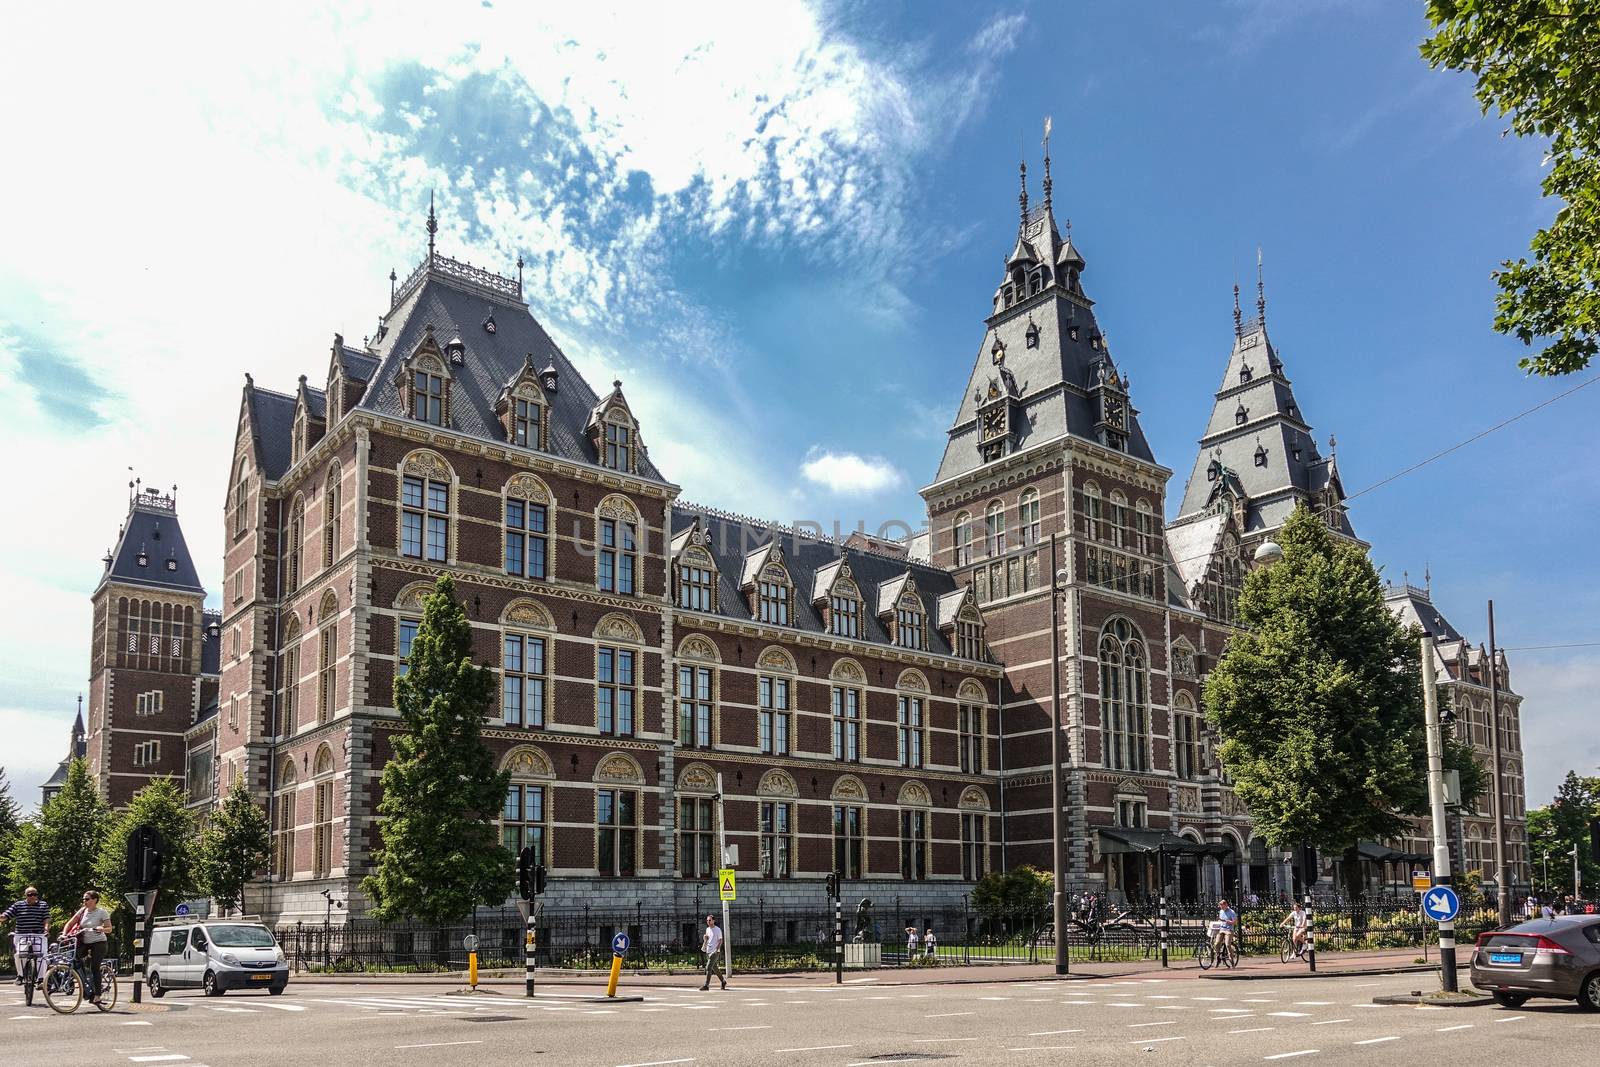 Rijksmuseum facade and central entrance in Amsterdam Netherlands by Claudine